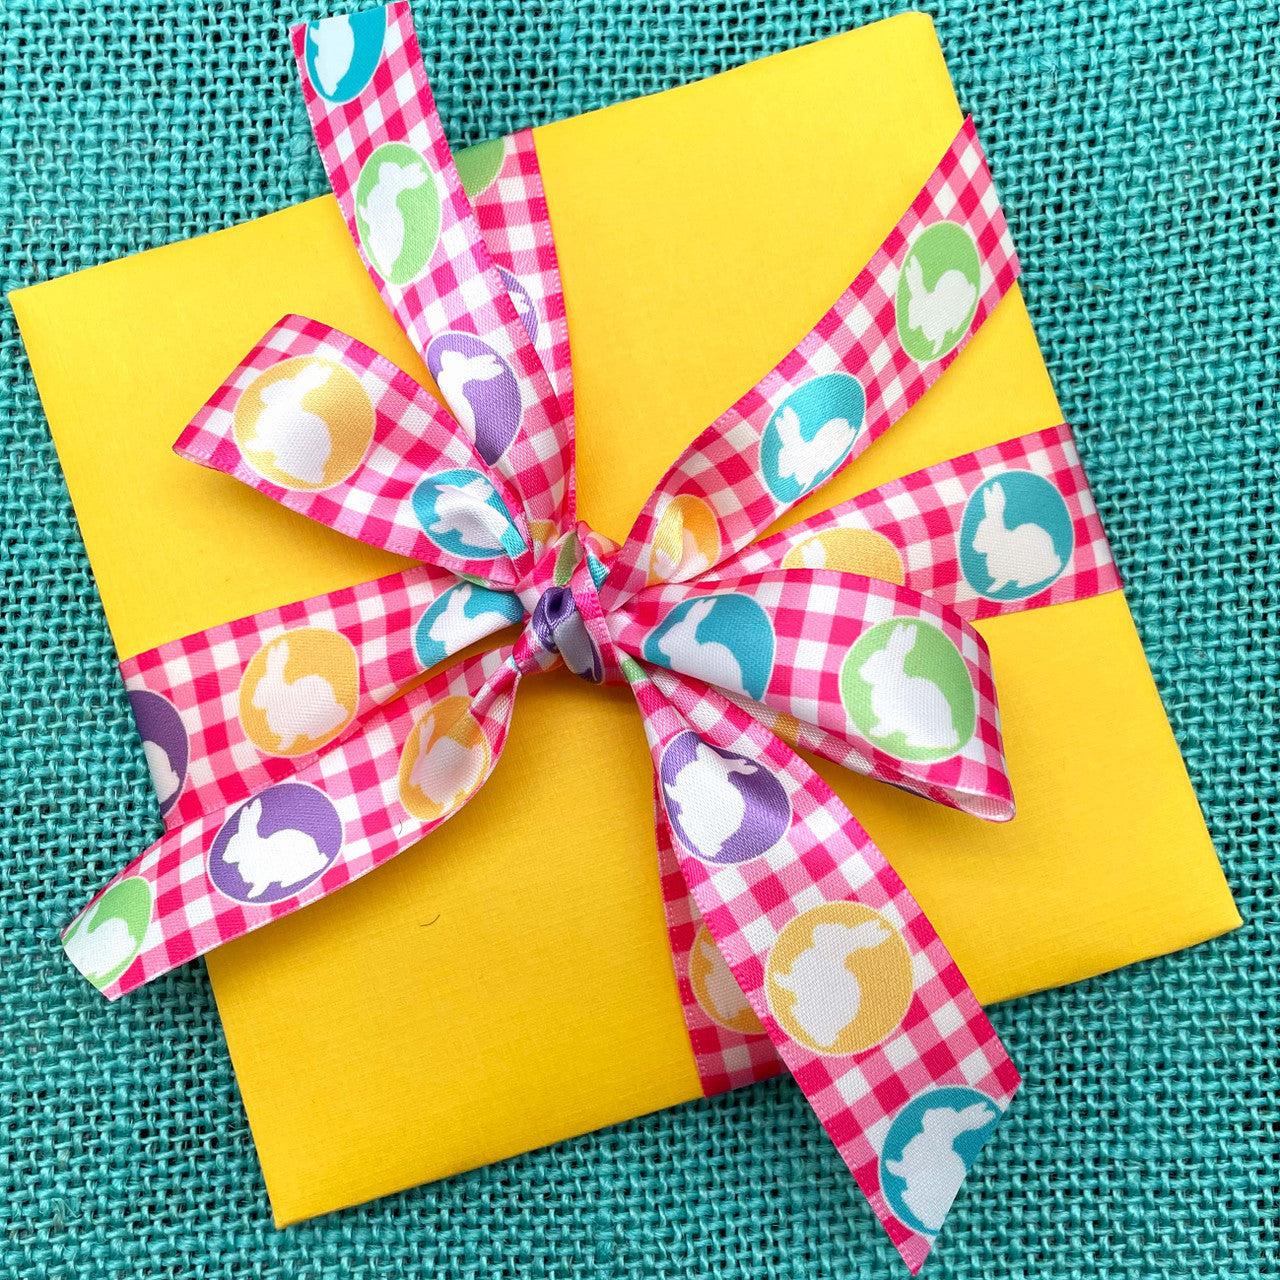 Tie this fun Spring ribbon on a sunny yellow package for the perfect Spring gift!